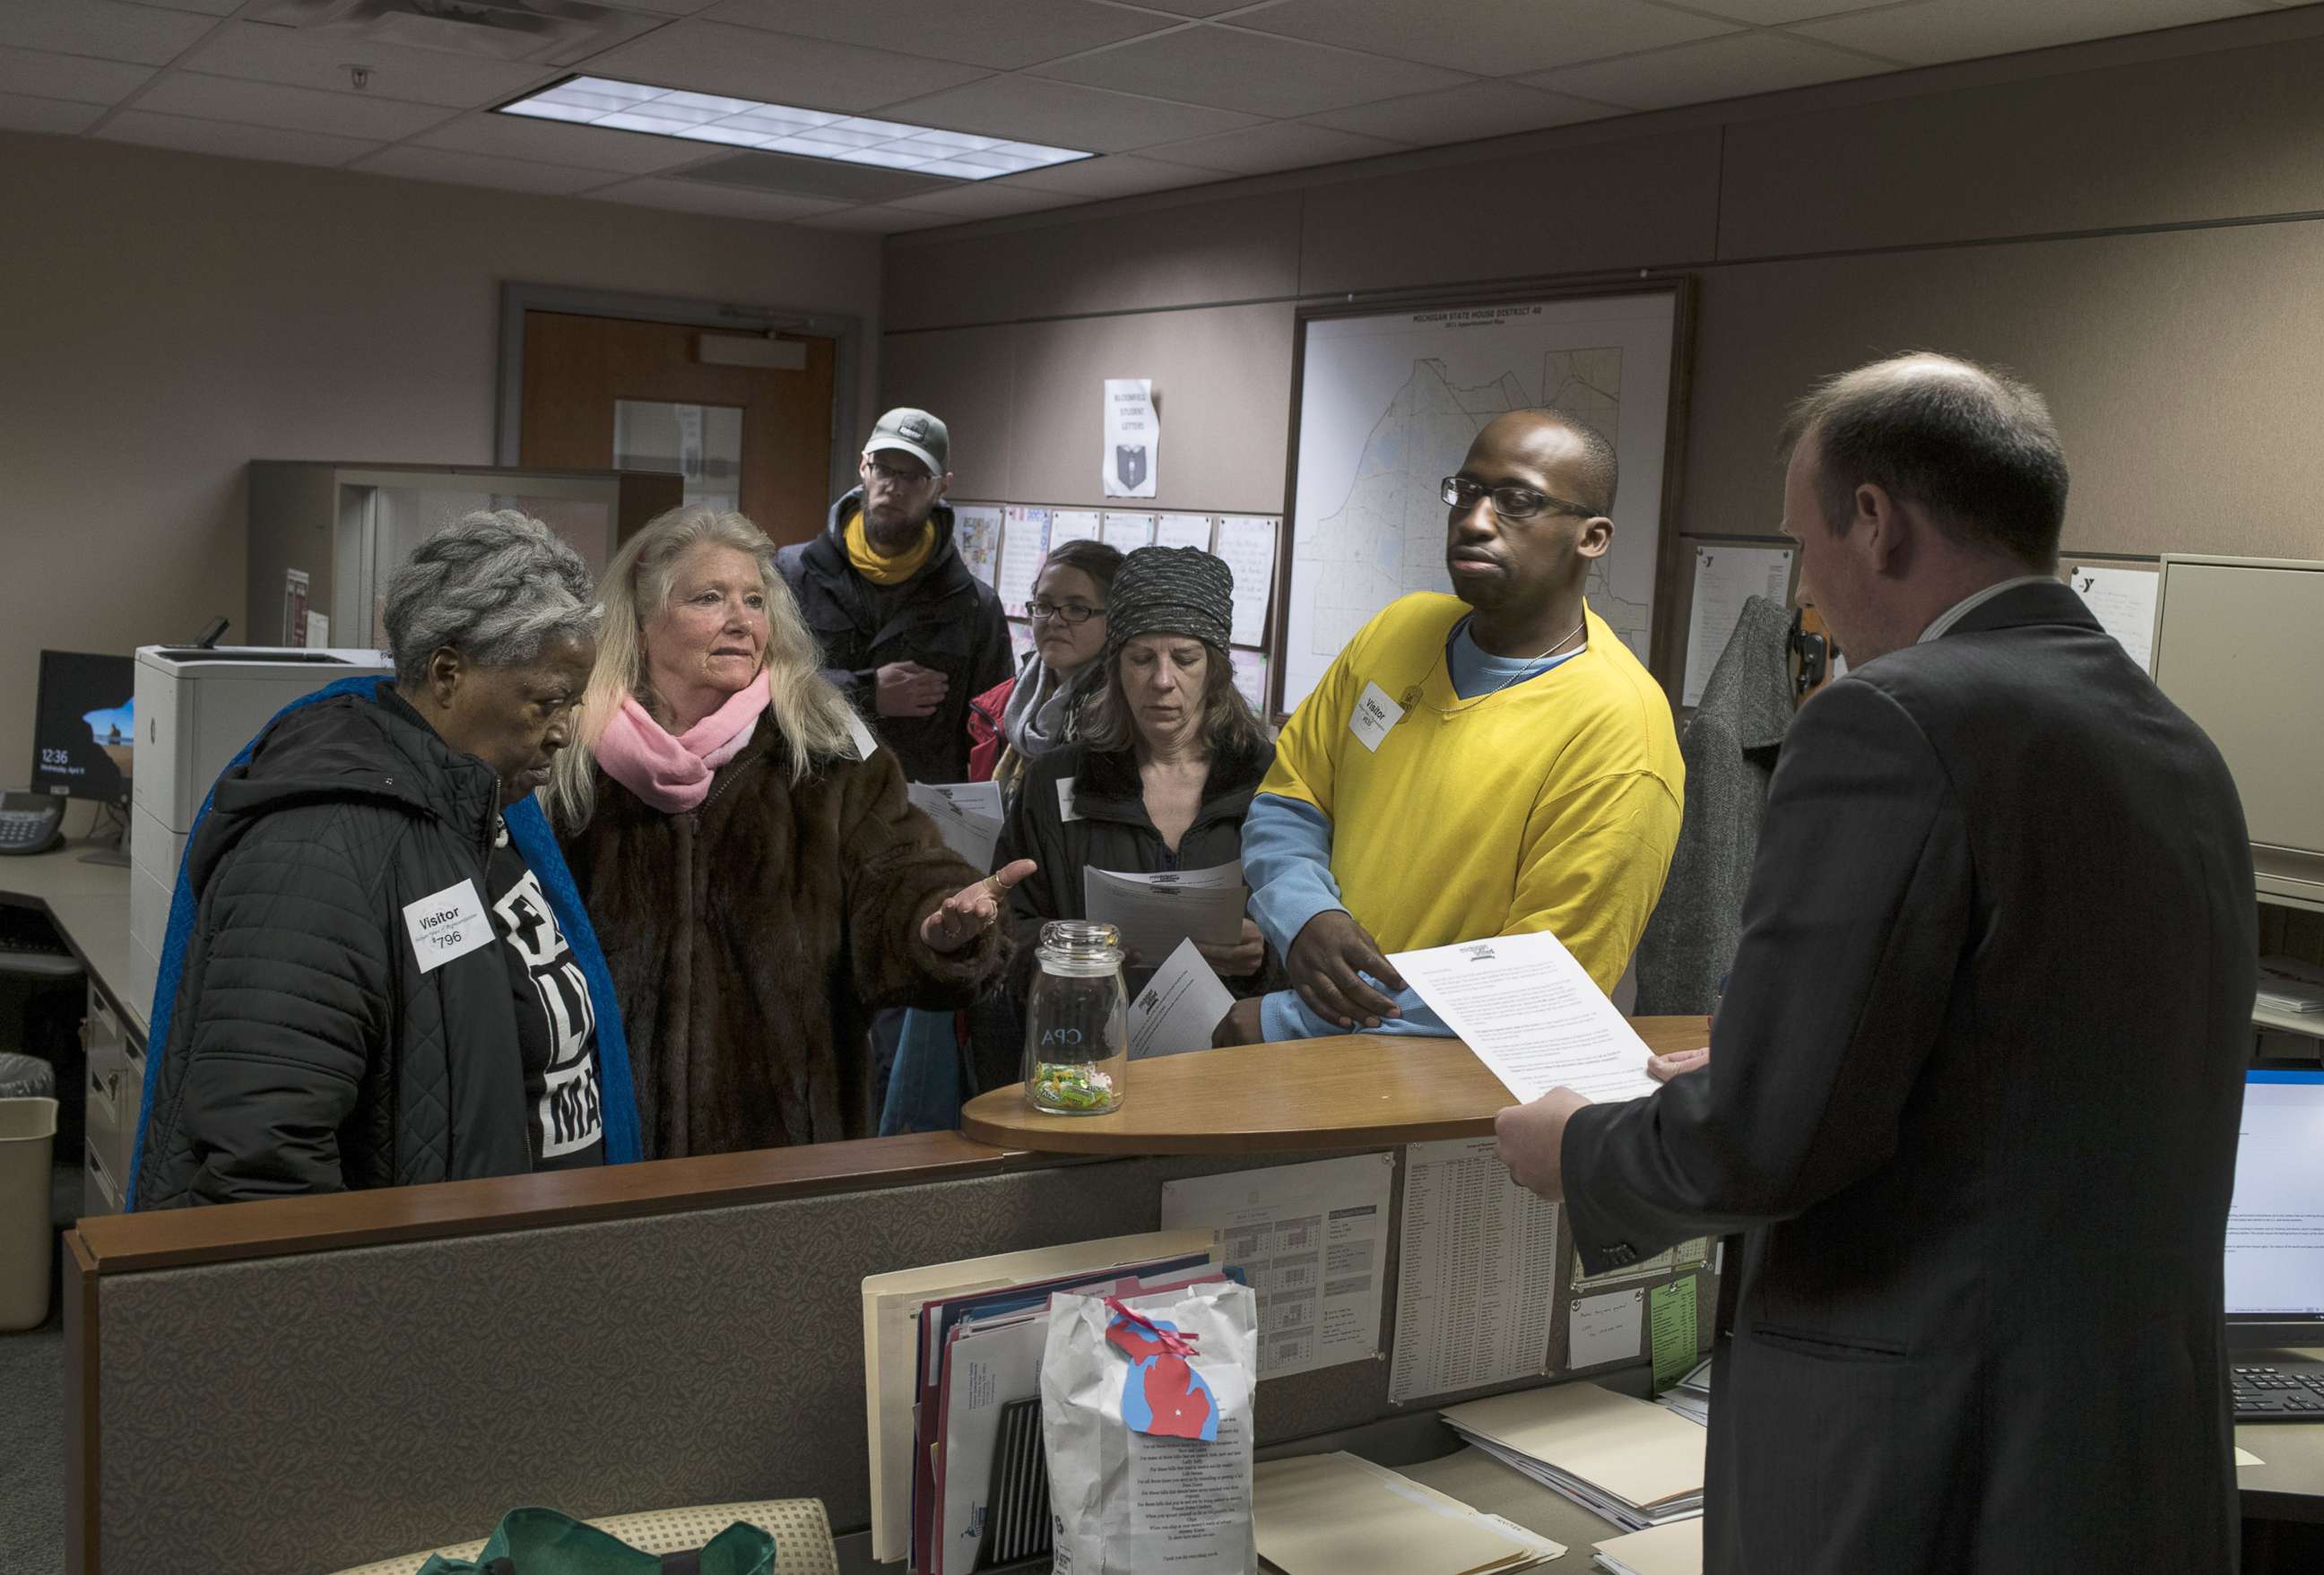 PHOTO: Alongside other protesters, Gladyes Williamson, of Flint, Michigan, delivers a list of demands, including a demand to keep water distribution sites open, to the offices of state representatives on April 11, 2018 in Lansing, Michigan.